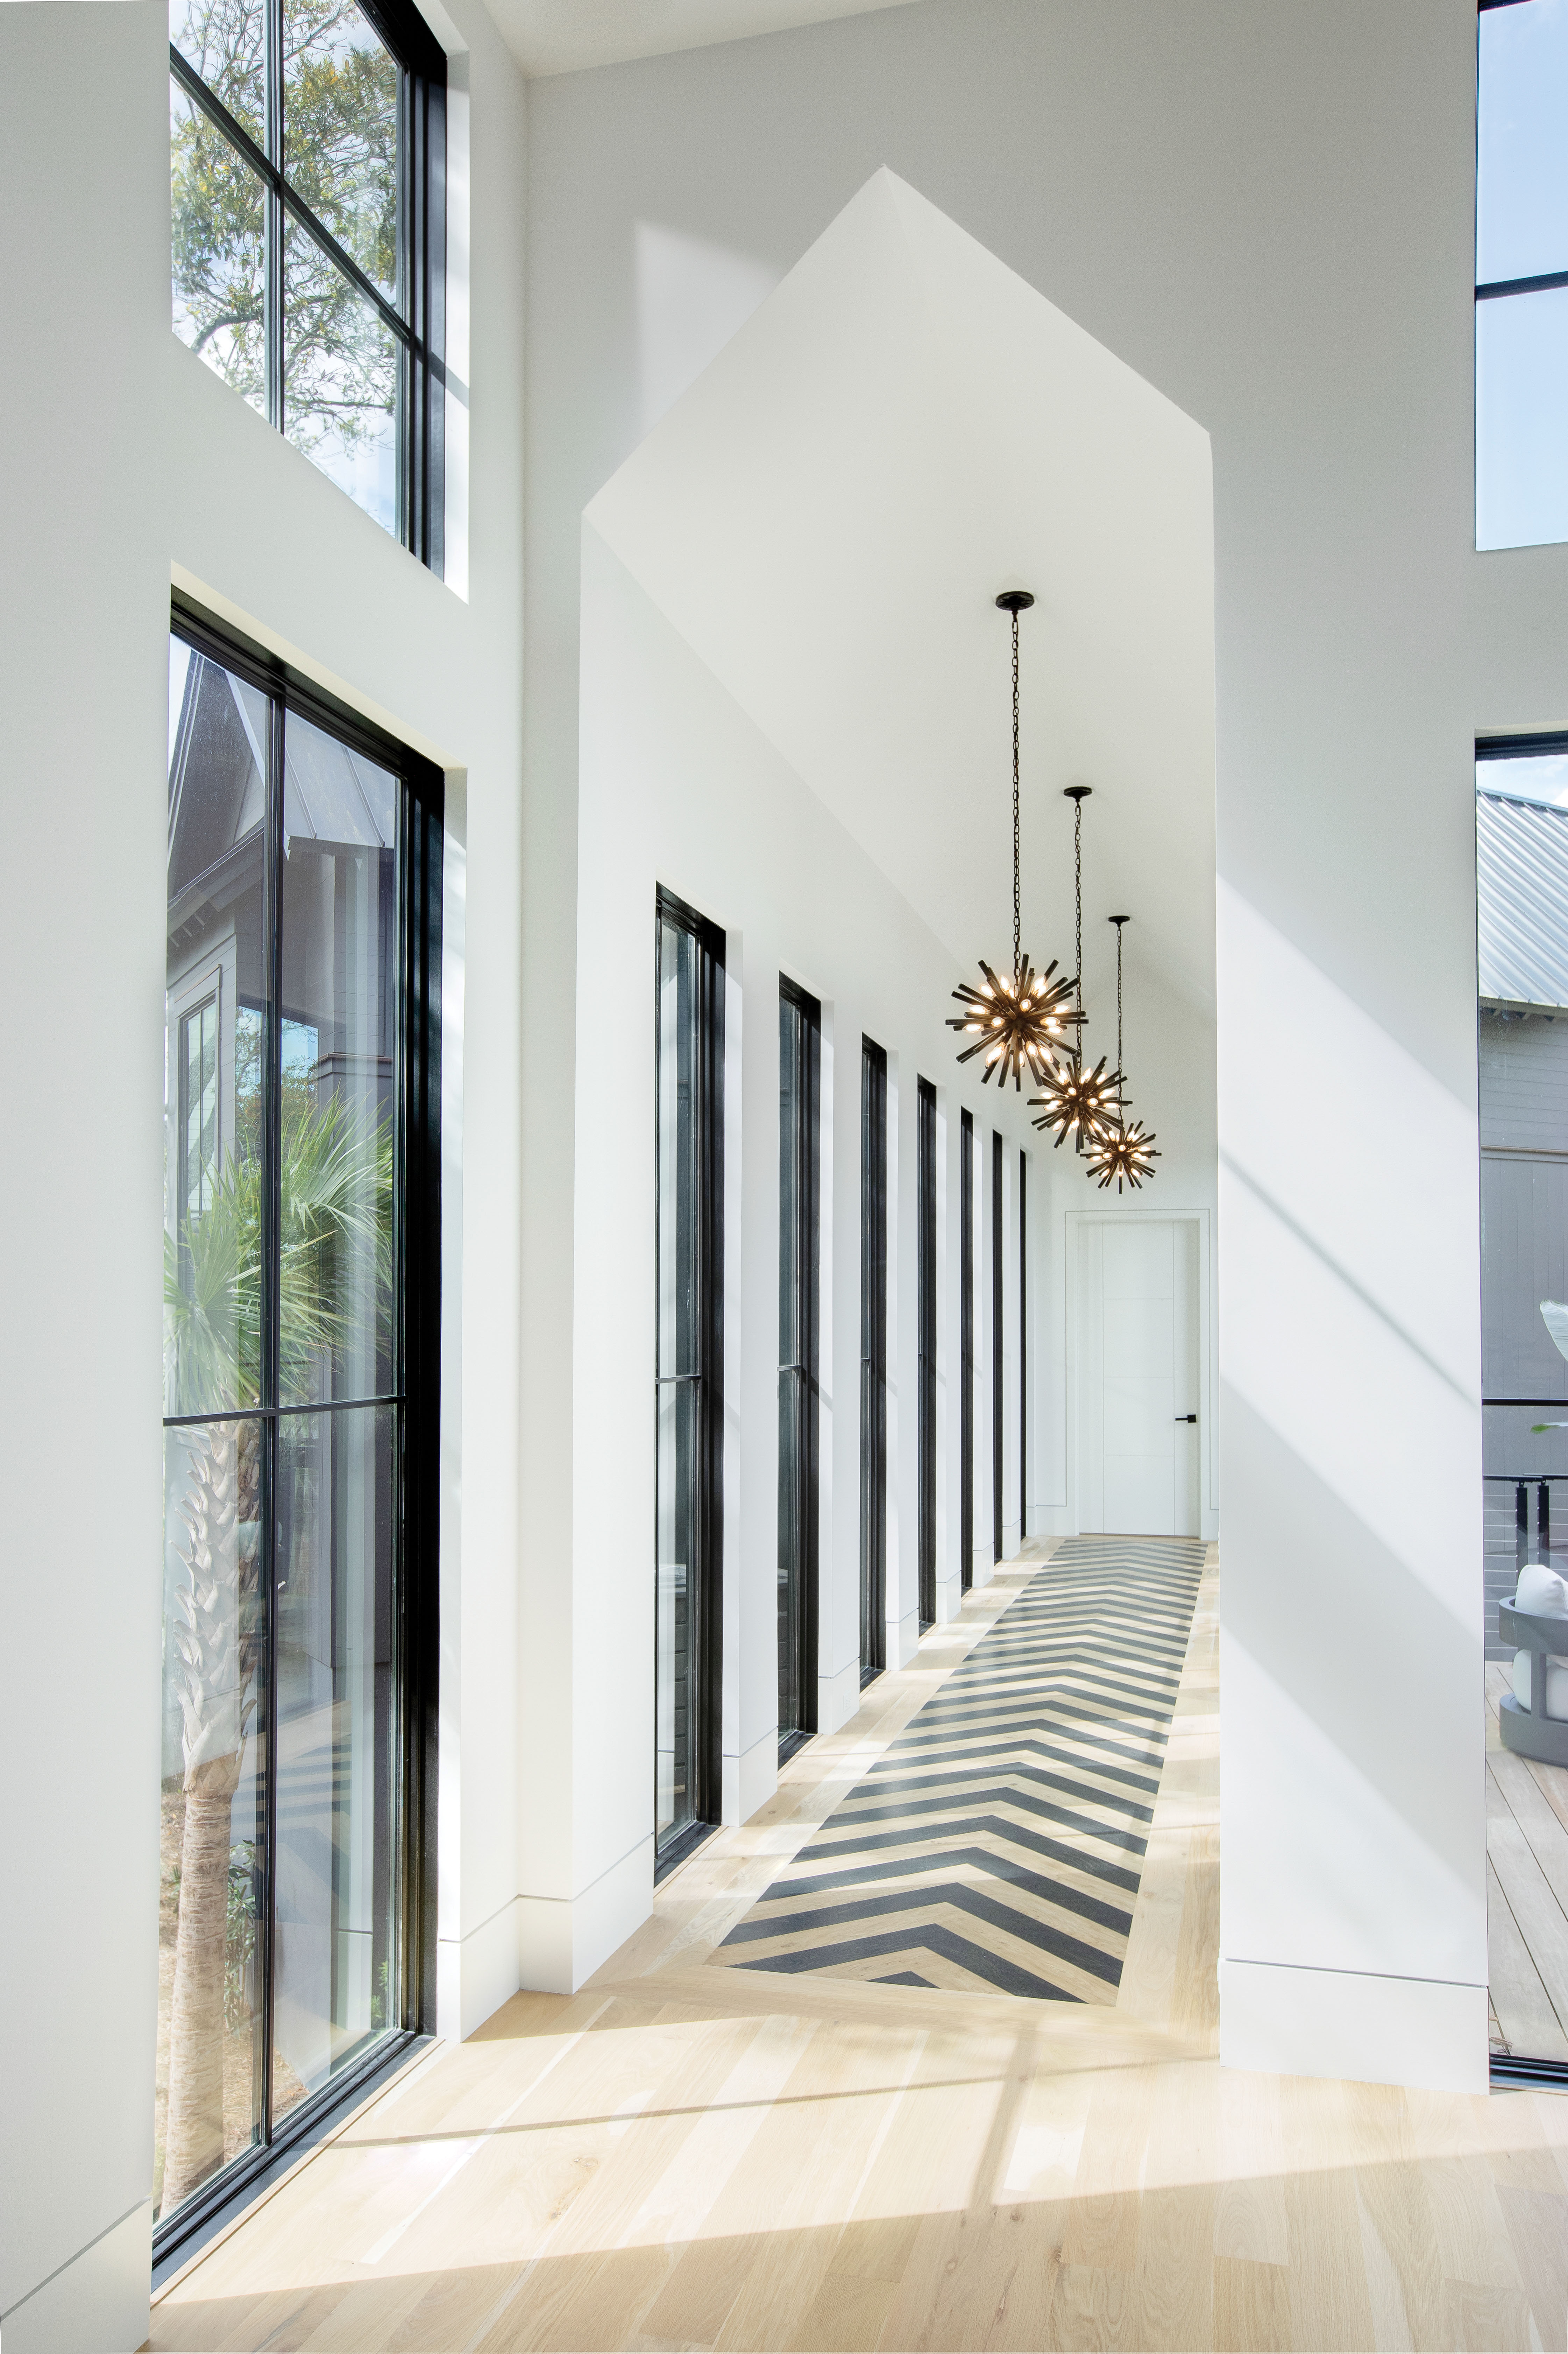 A long, window-filled corridor leads from the main living space to the homeowners’ bedroom suite.